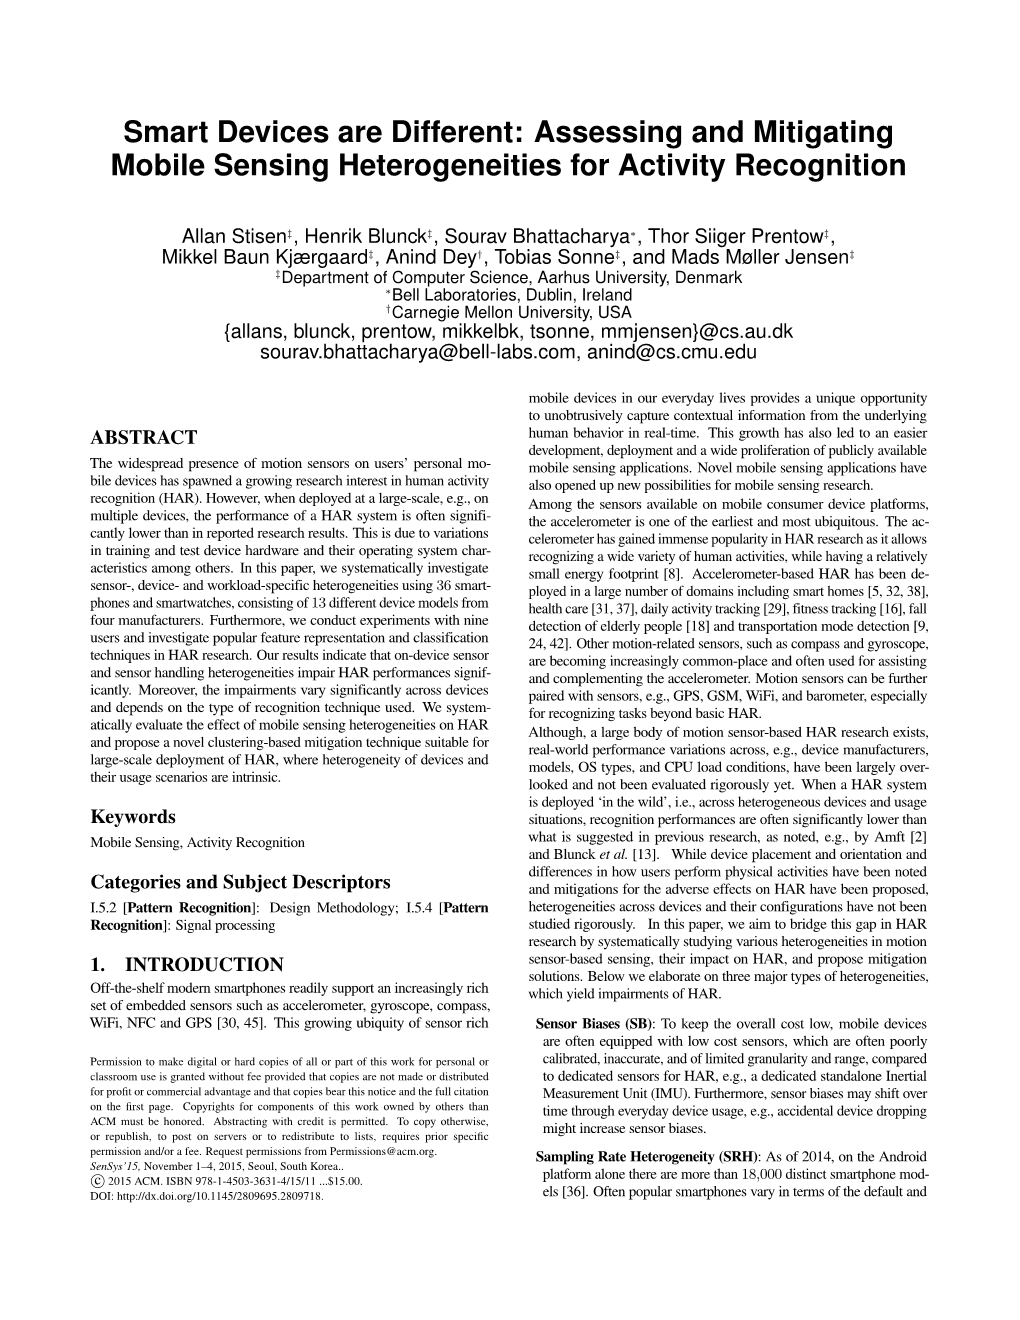 Assessing and Mitigating Mobile Sensing Heterogeneities for Activity Recognition